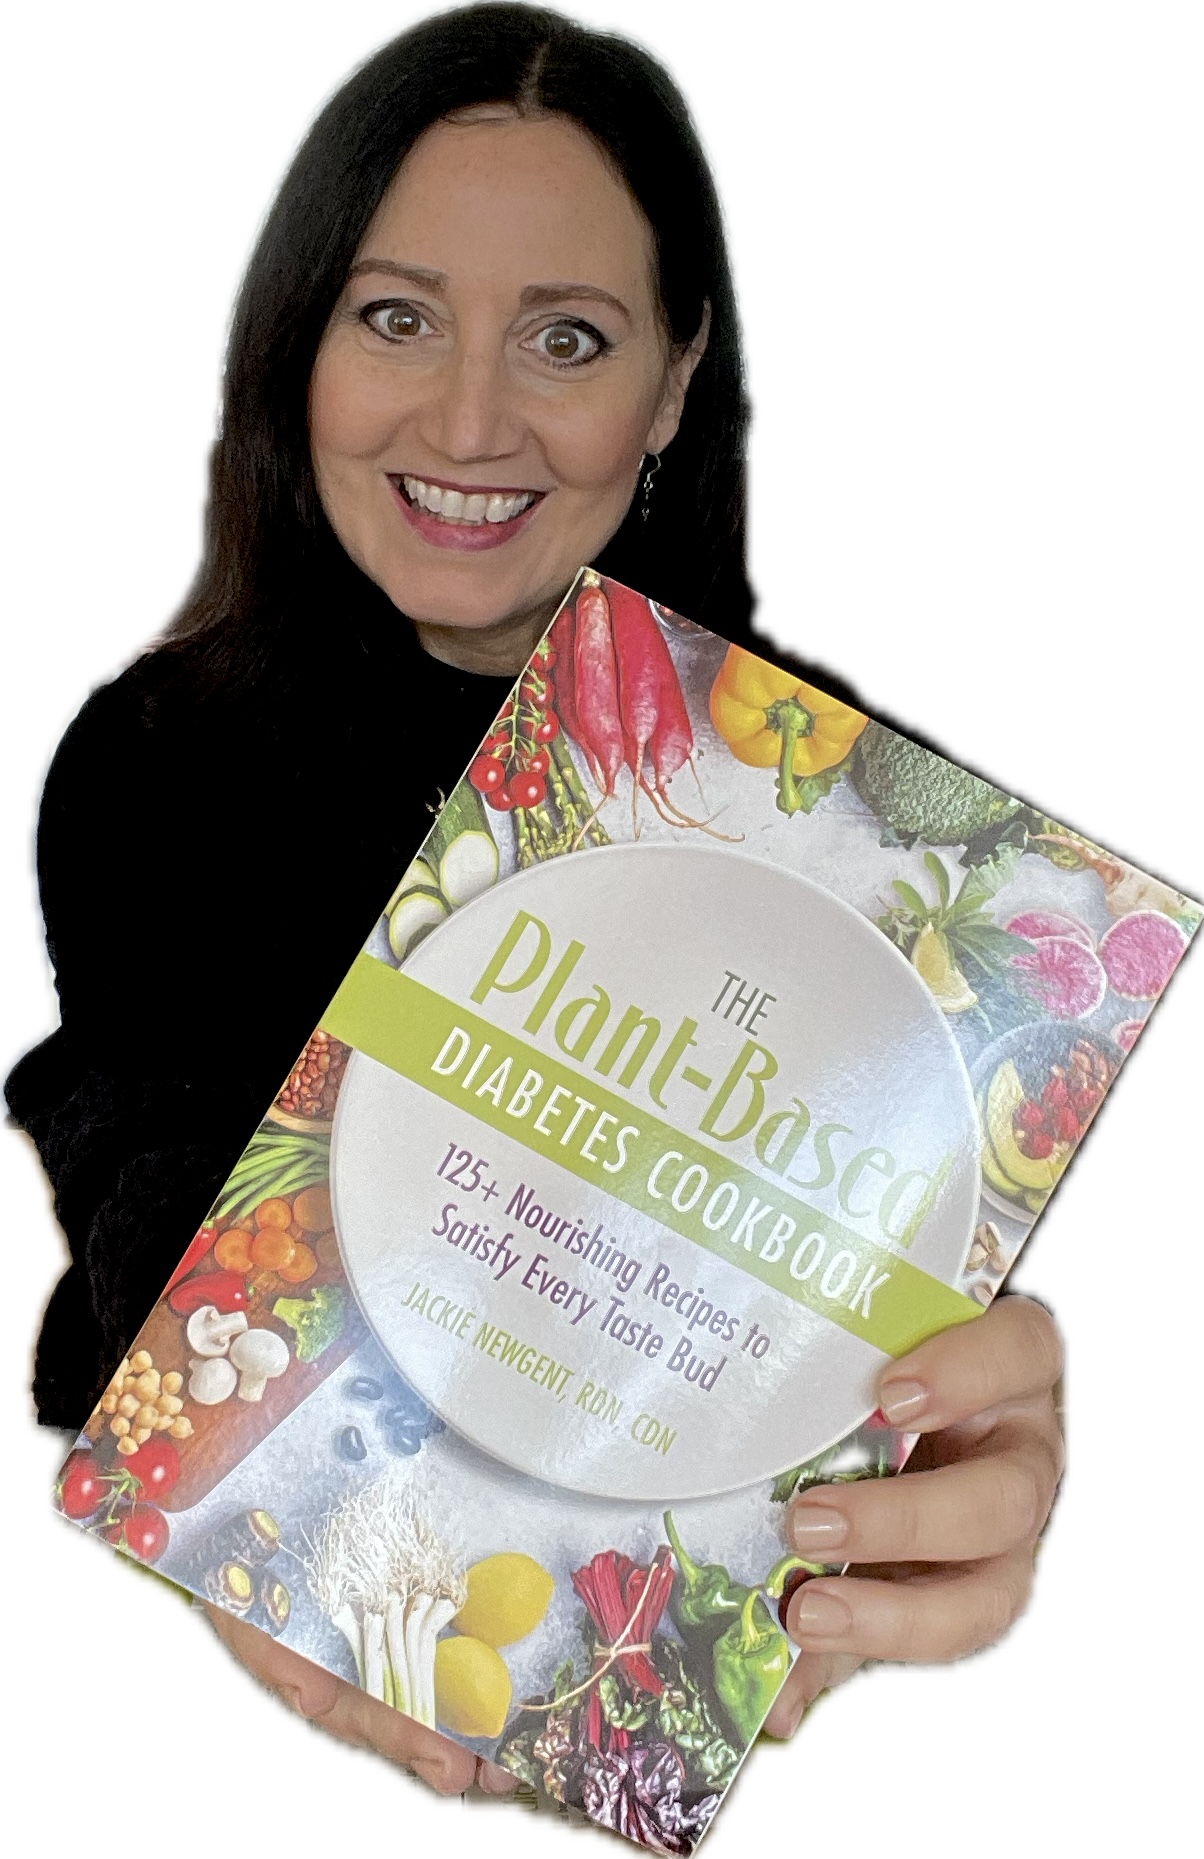 Jackie Newgent holding her new book, The Plant-Based Diabetes Cookbook